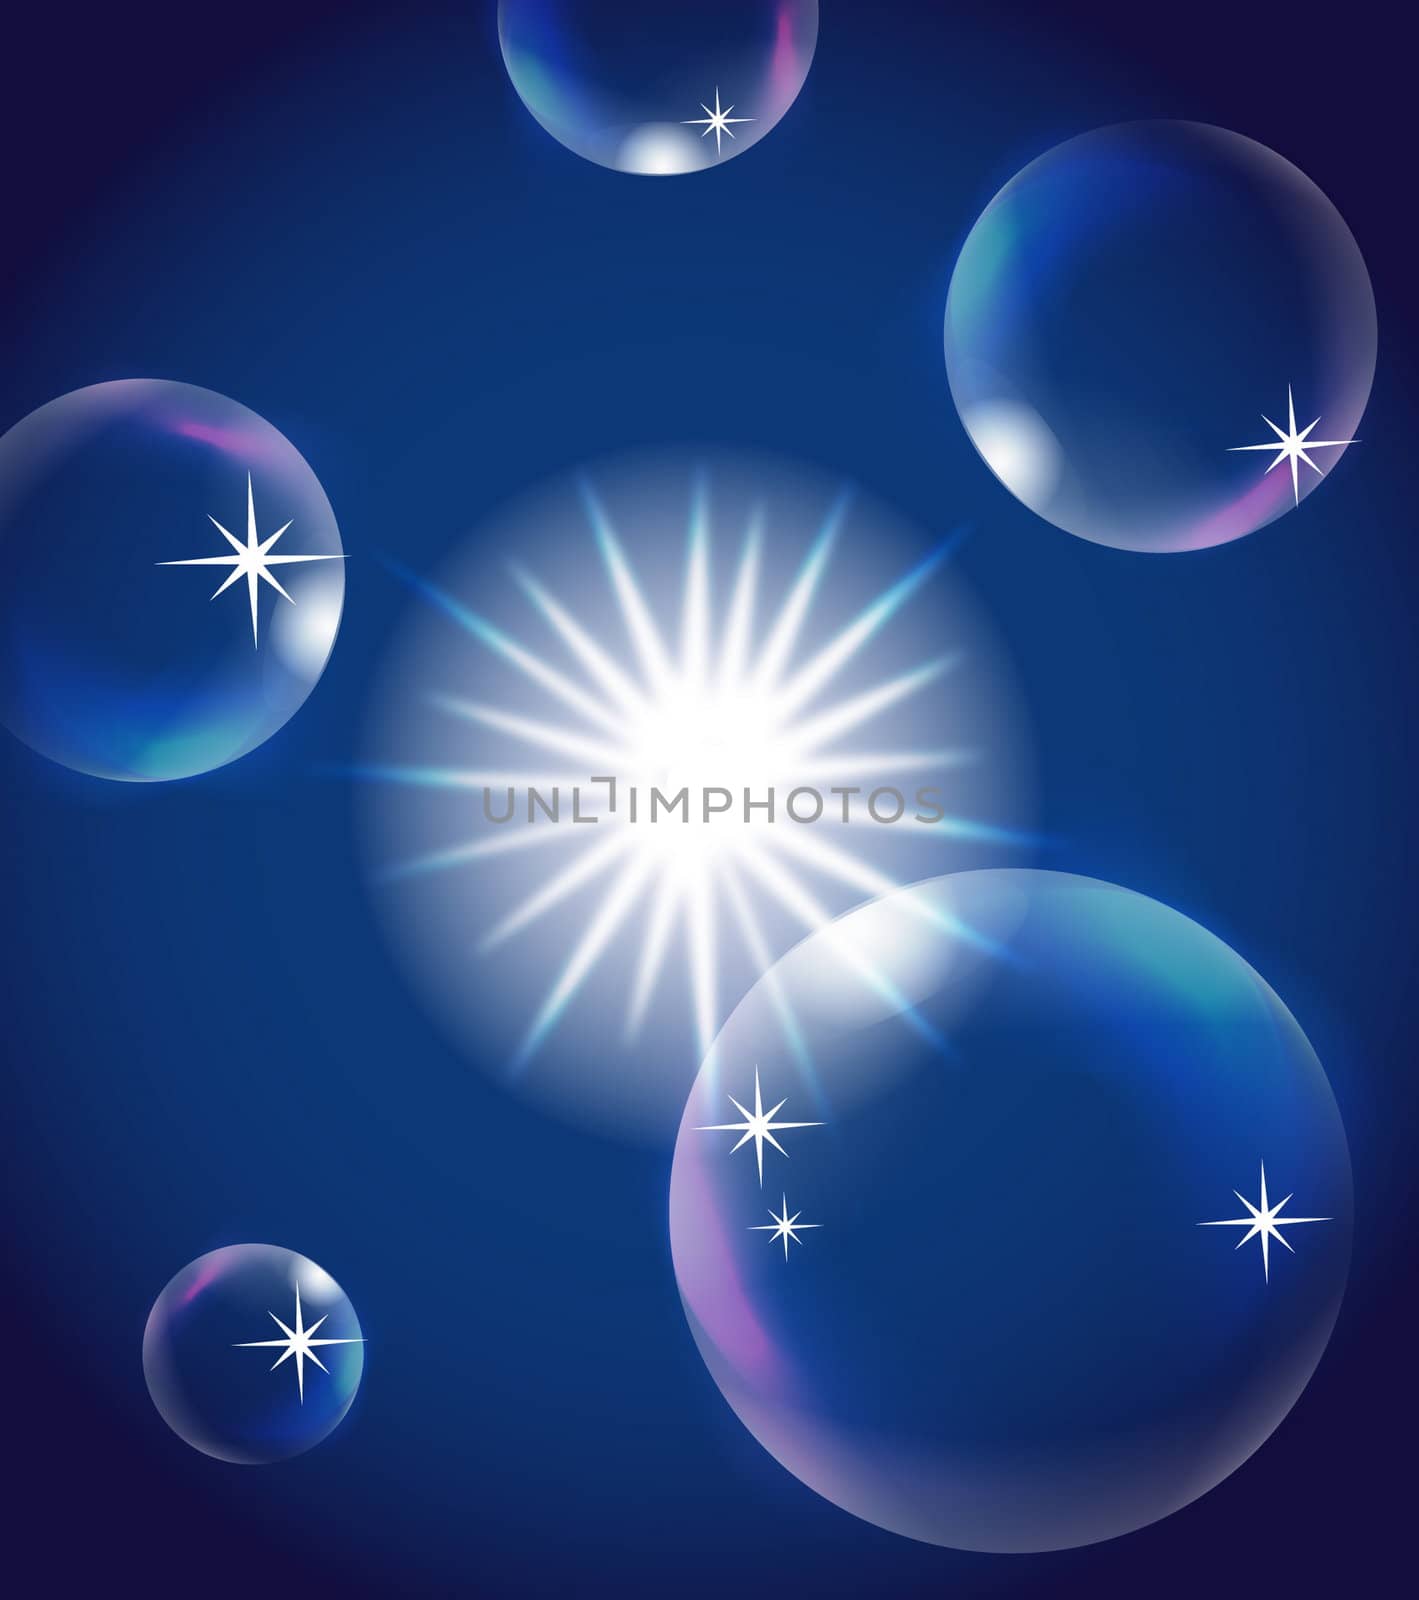 sun in blue sky with bubbles, illustration by svtrotof